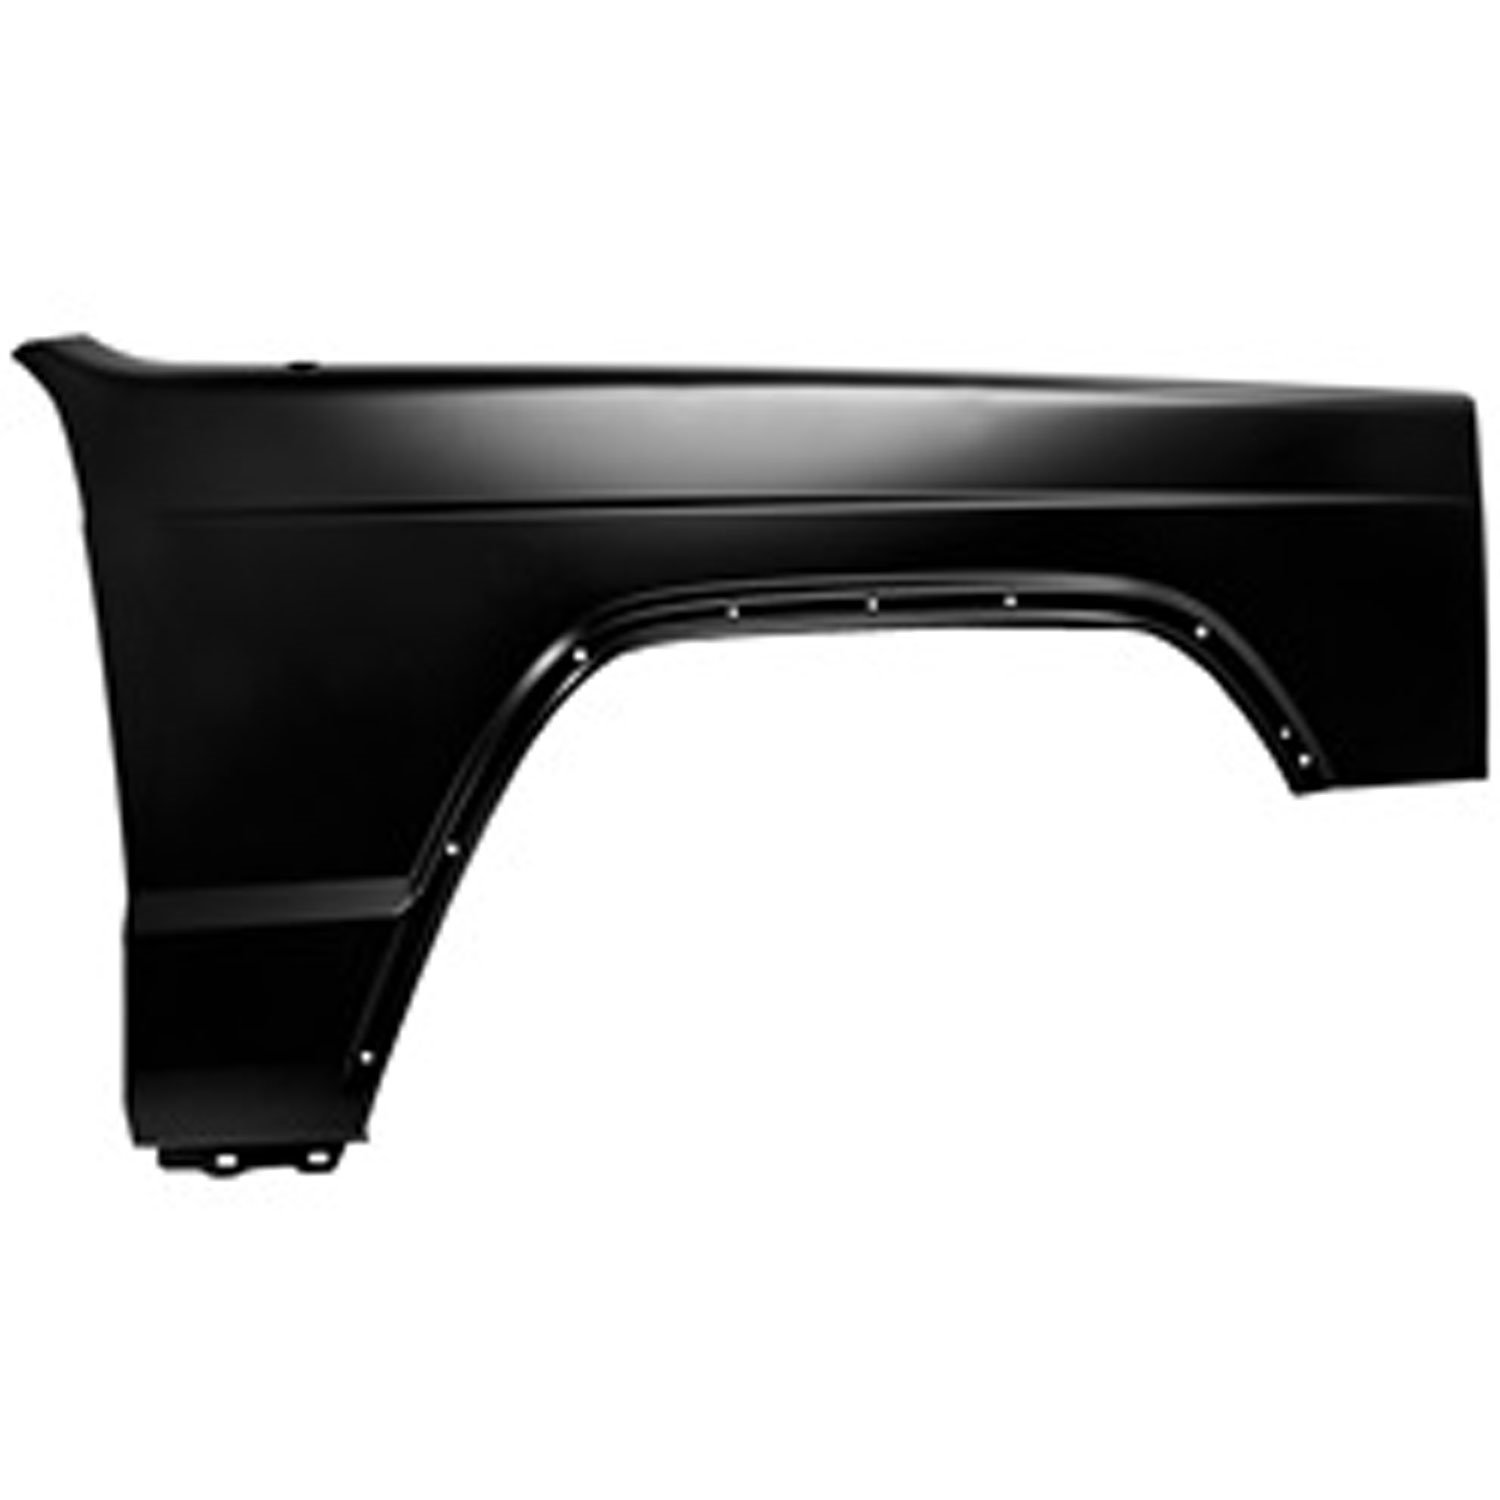 Replacement front fender from Omix-ADA, Fits right side on 97-01 Jeep Cherokee XJ